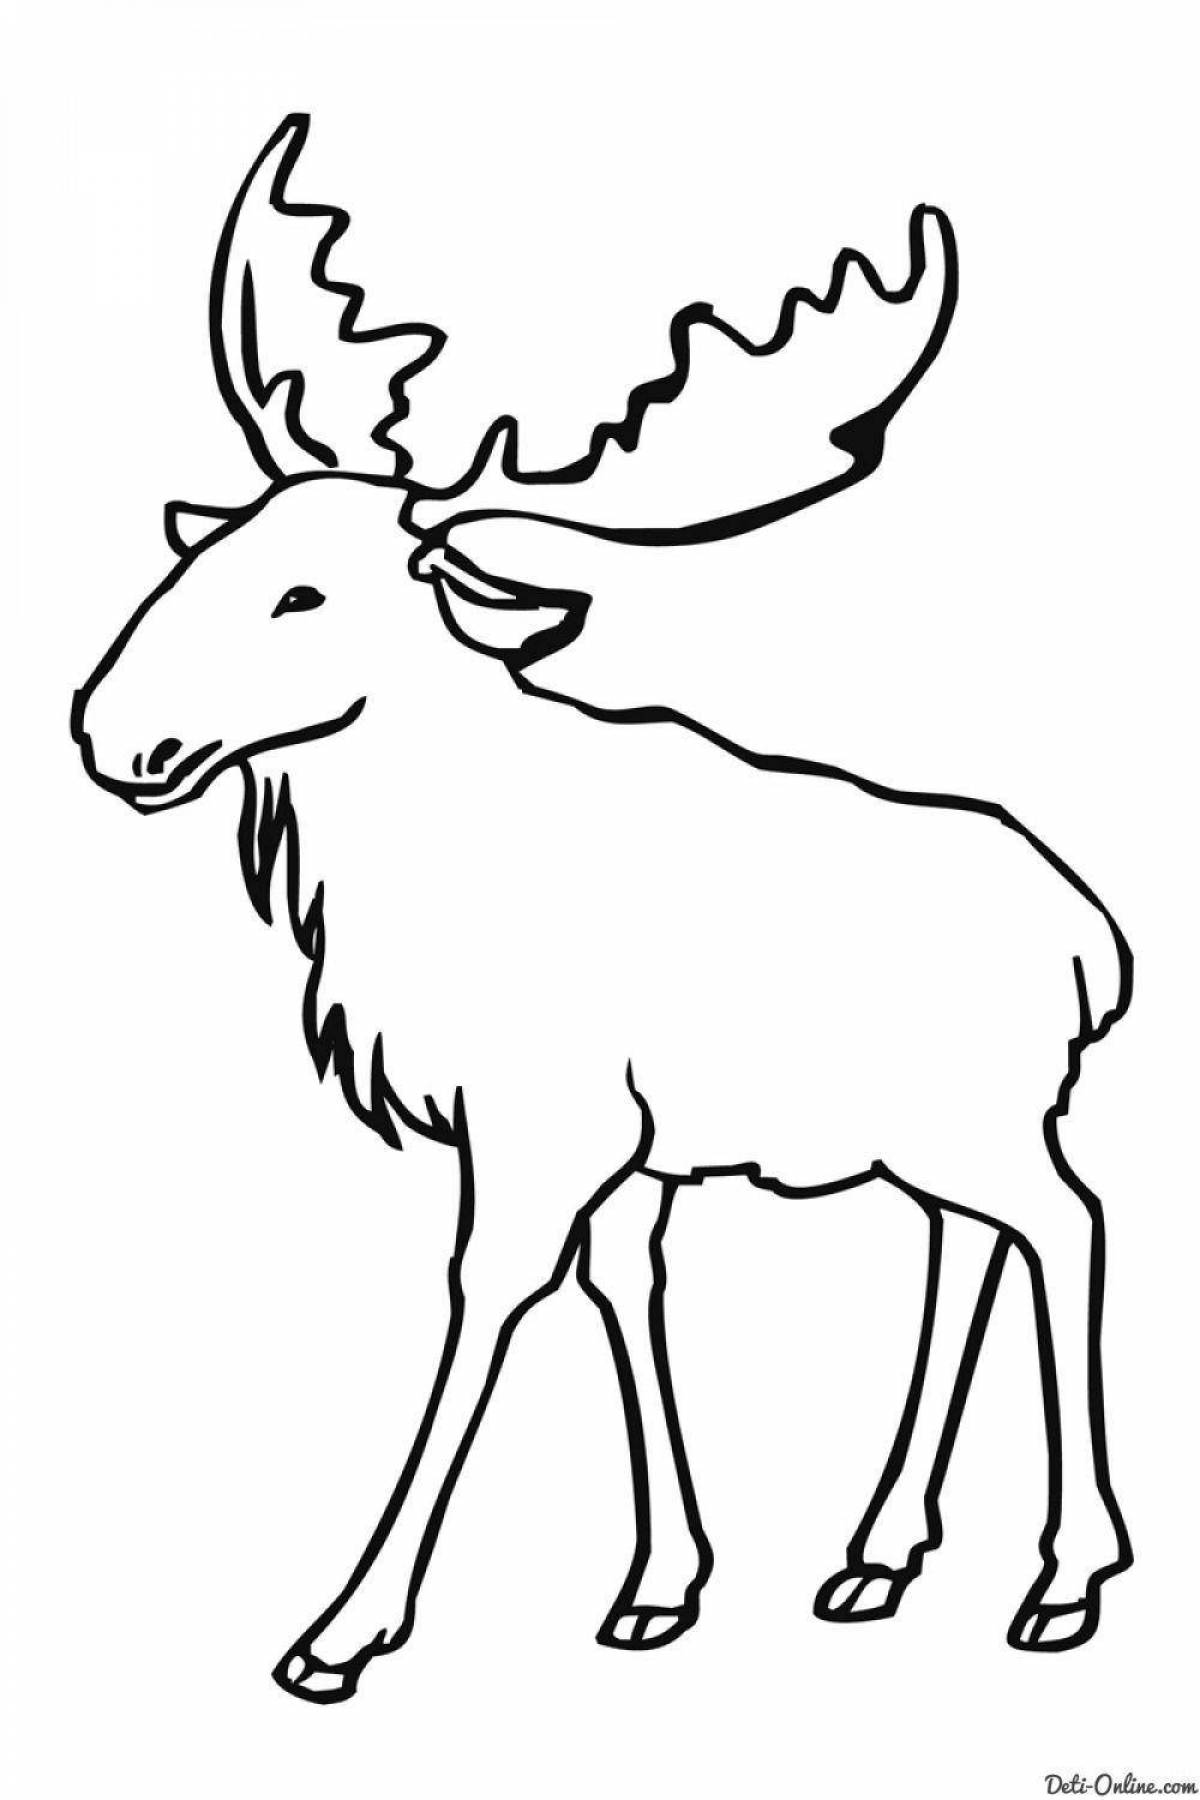 Exquisite deer coloring book for kids 6-7 years old